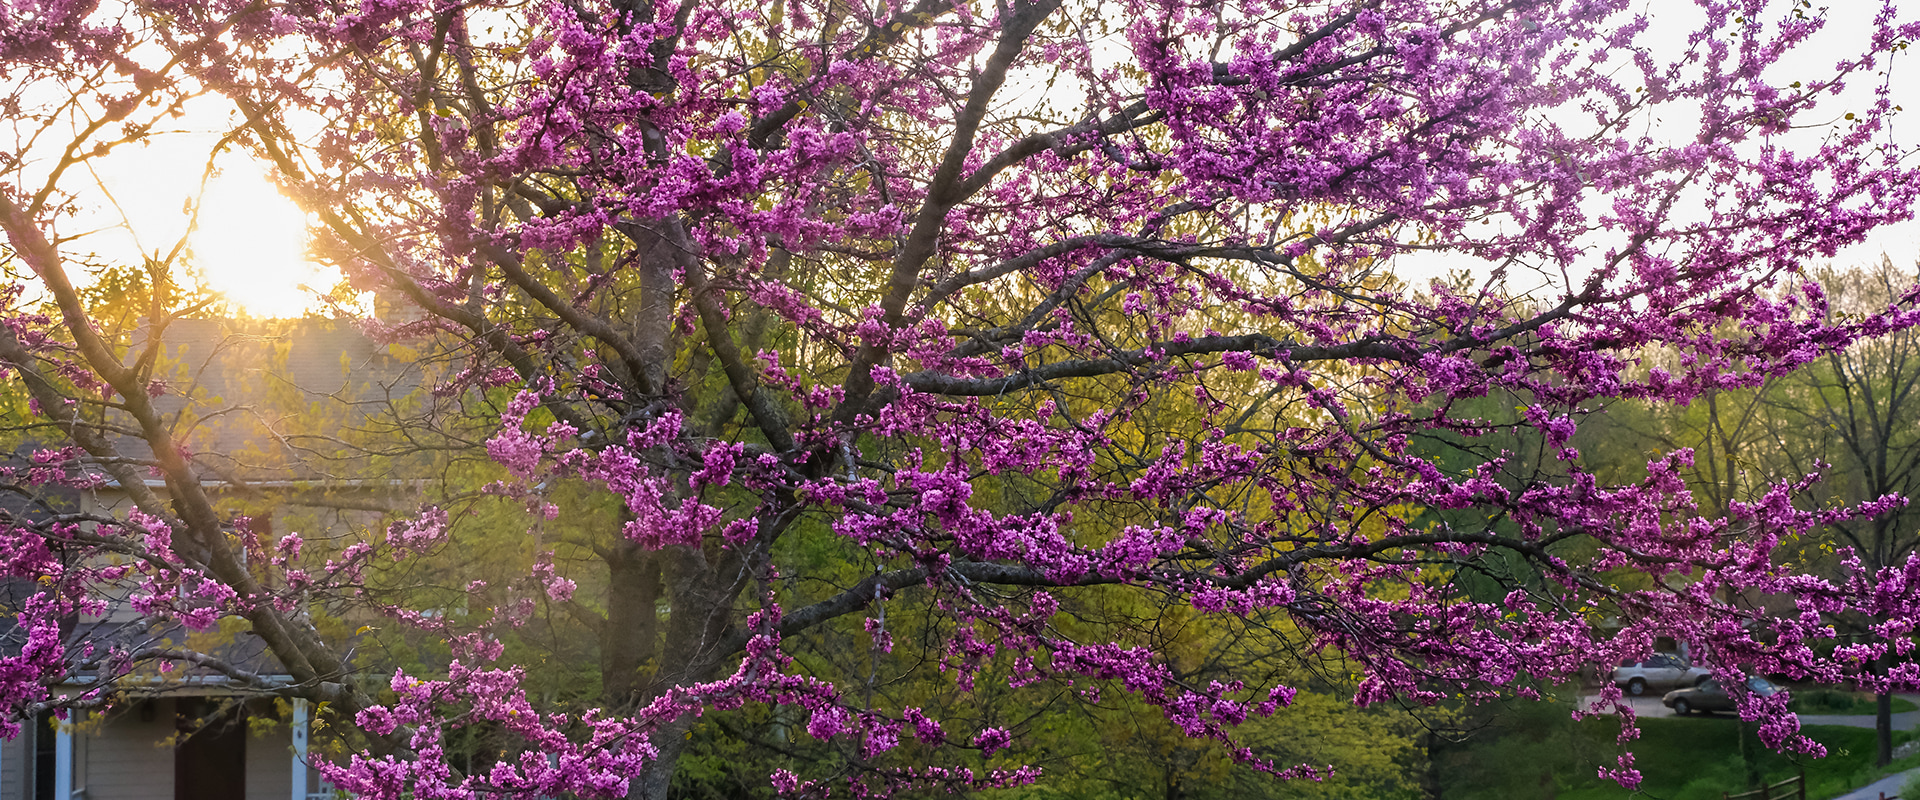 What is the best tree to plant in your yard?